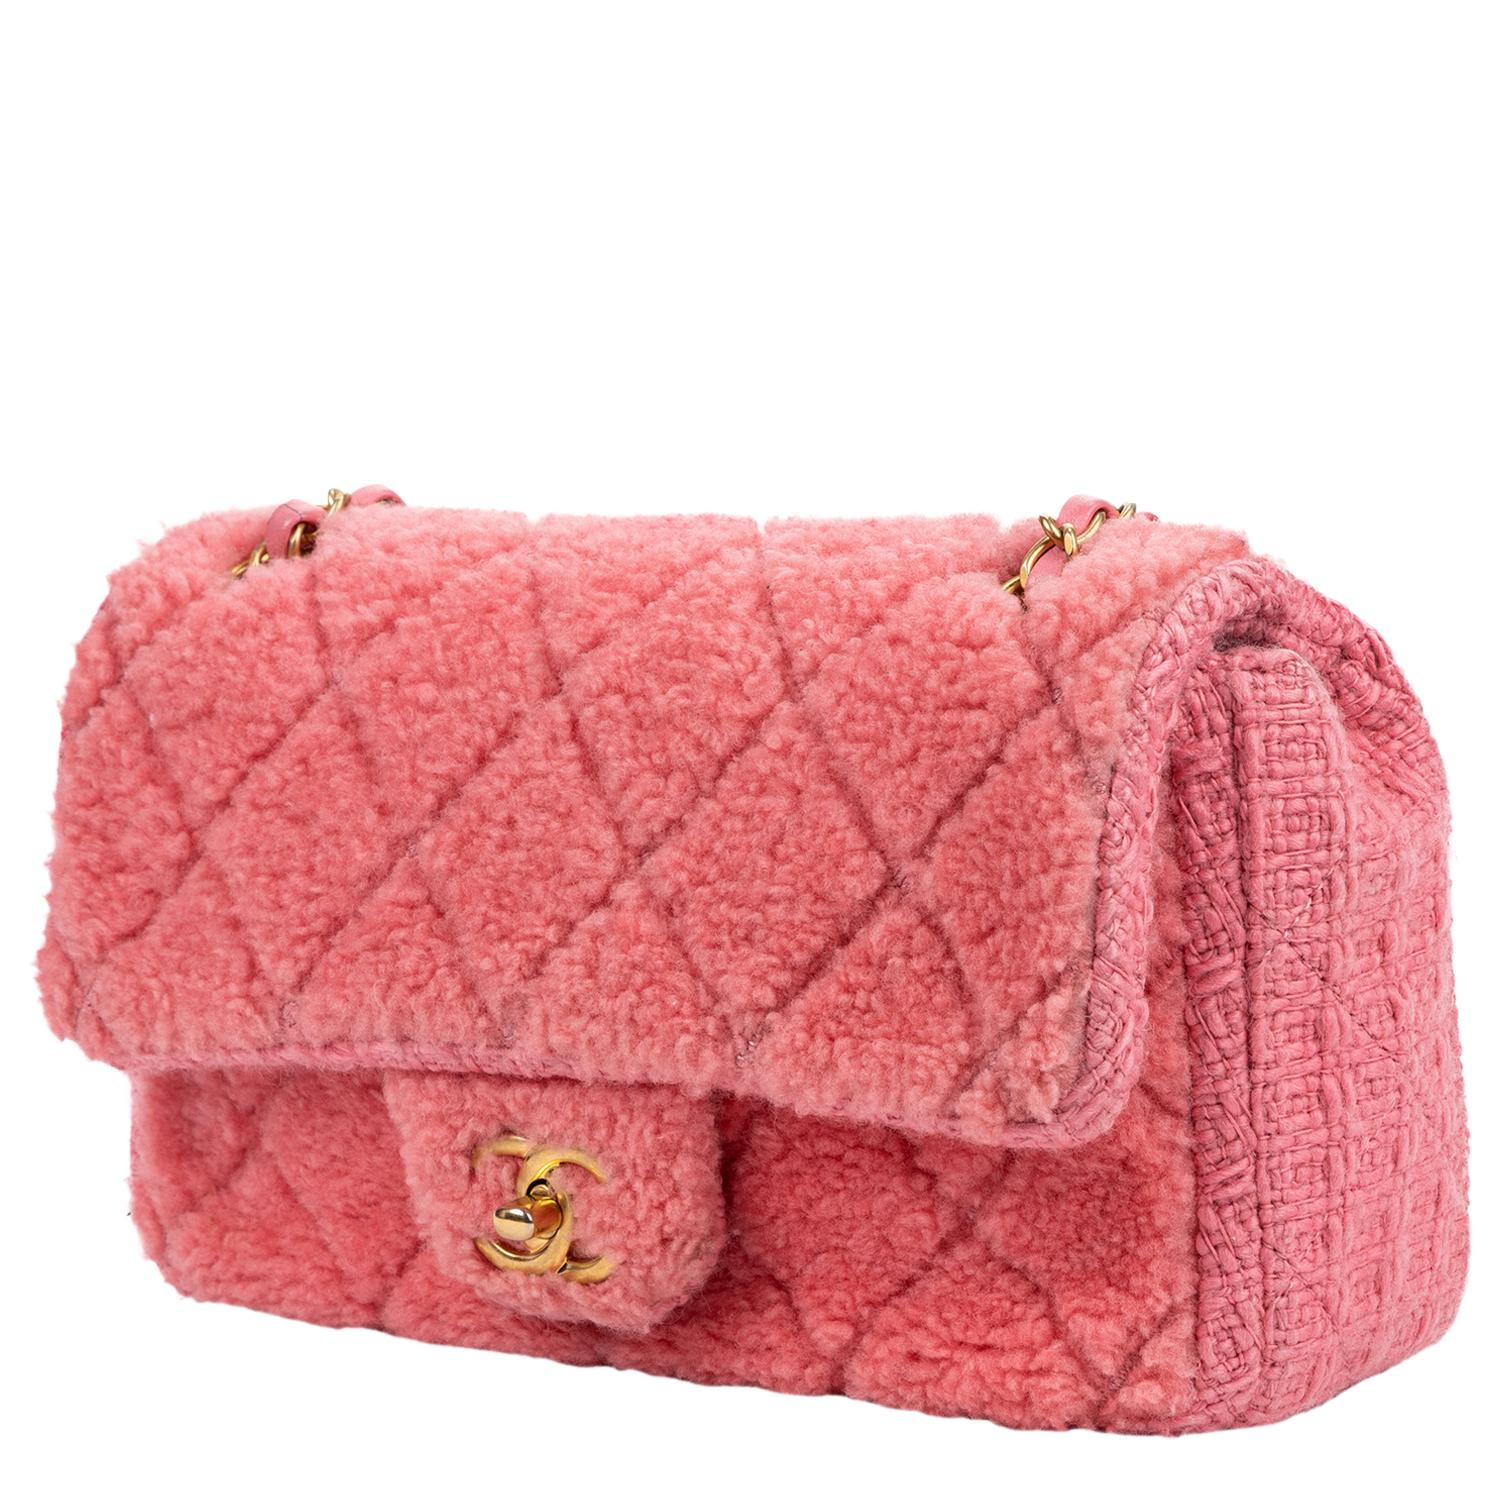 Pretty in quilted PINK! The perfect addition to your cozy Sunday in Firestone or brunch with the girls on Sunday. This limited edition is crafted in pink shearling sheepskin, gold-tone hardware, and an adjustable shoulder strap. The iconic CC